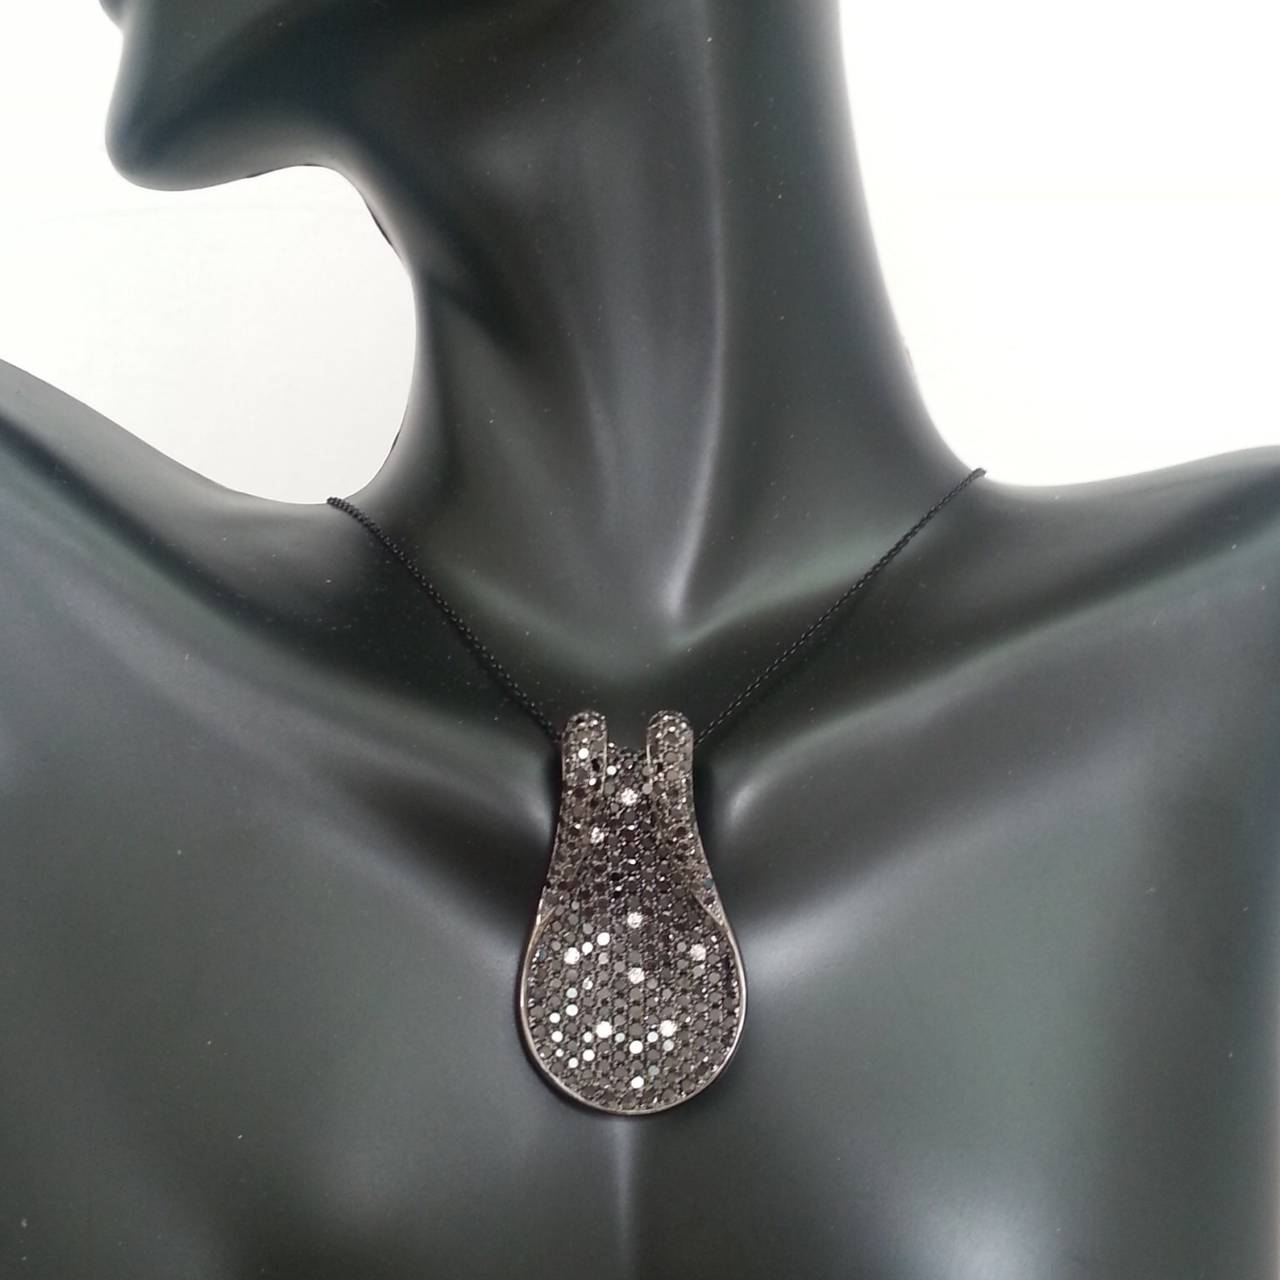 251 Excellent cut AAA quality natural black diamonds, micro pave set one by one by our very own skilled craftsmen. This pendant took over 6 months to complete! There is absolutely no gap in between the diamonds which gives this piece a rich elegant